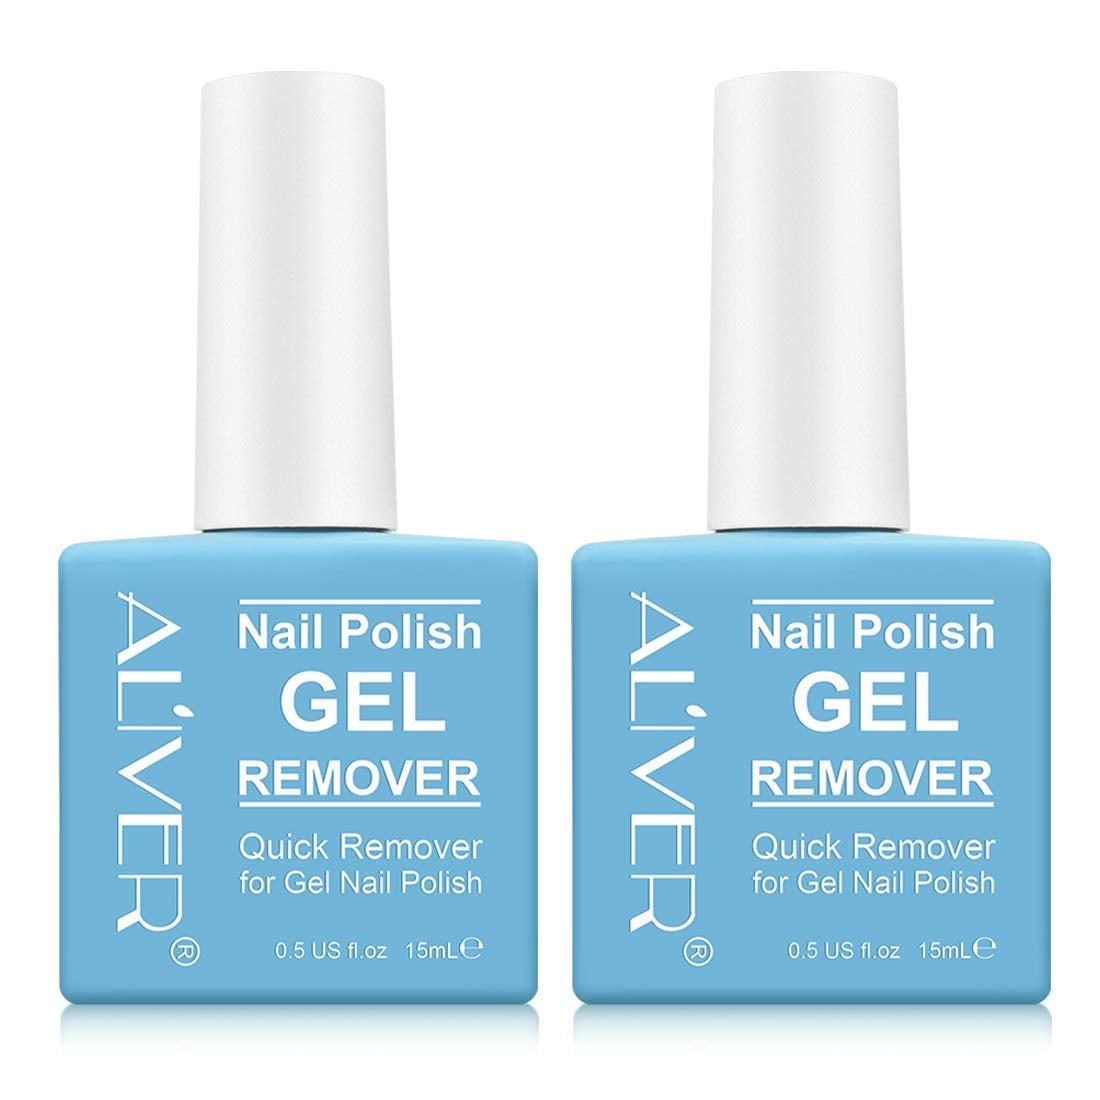 Aliver Gel Nail Polish Remover Review With Pictures | POPSUGAR Beauty UK